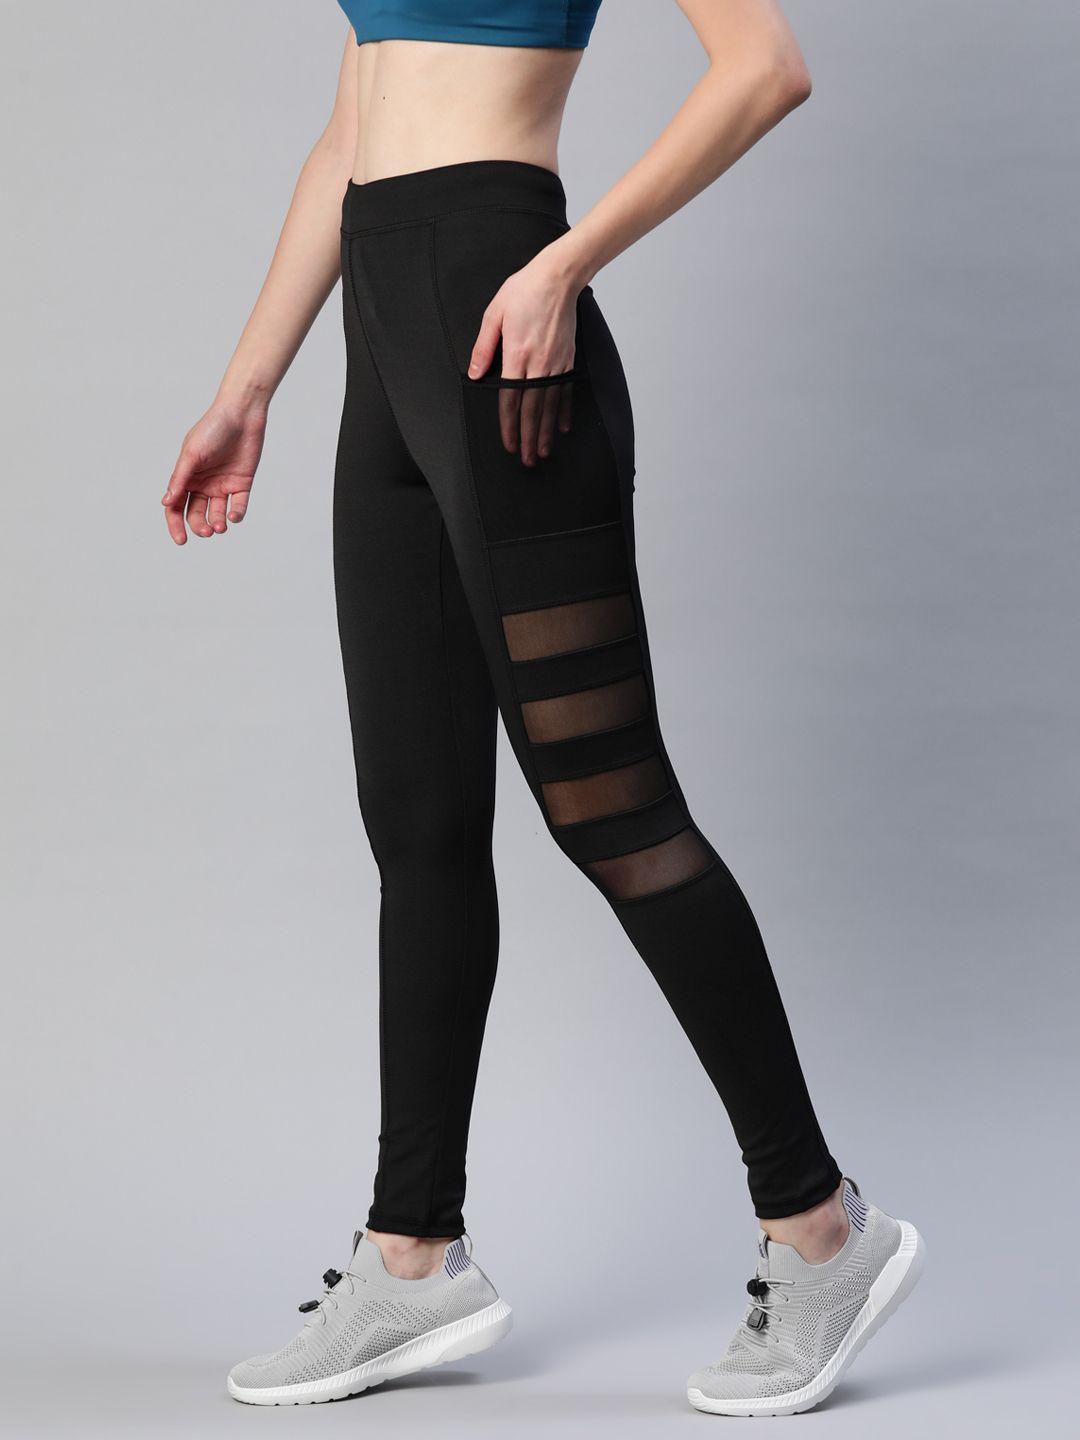 blinkin women black rapid dry tights with breathable mesh panels & side pockets